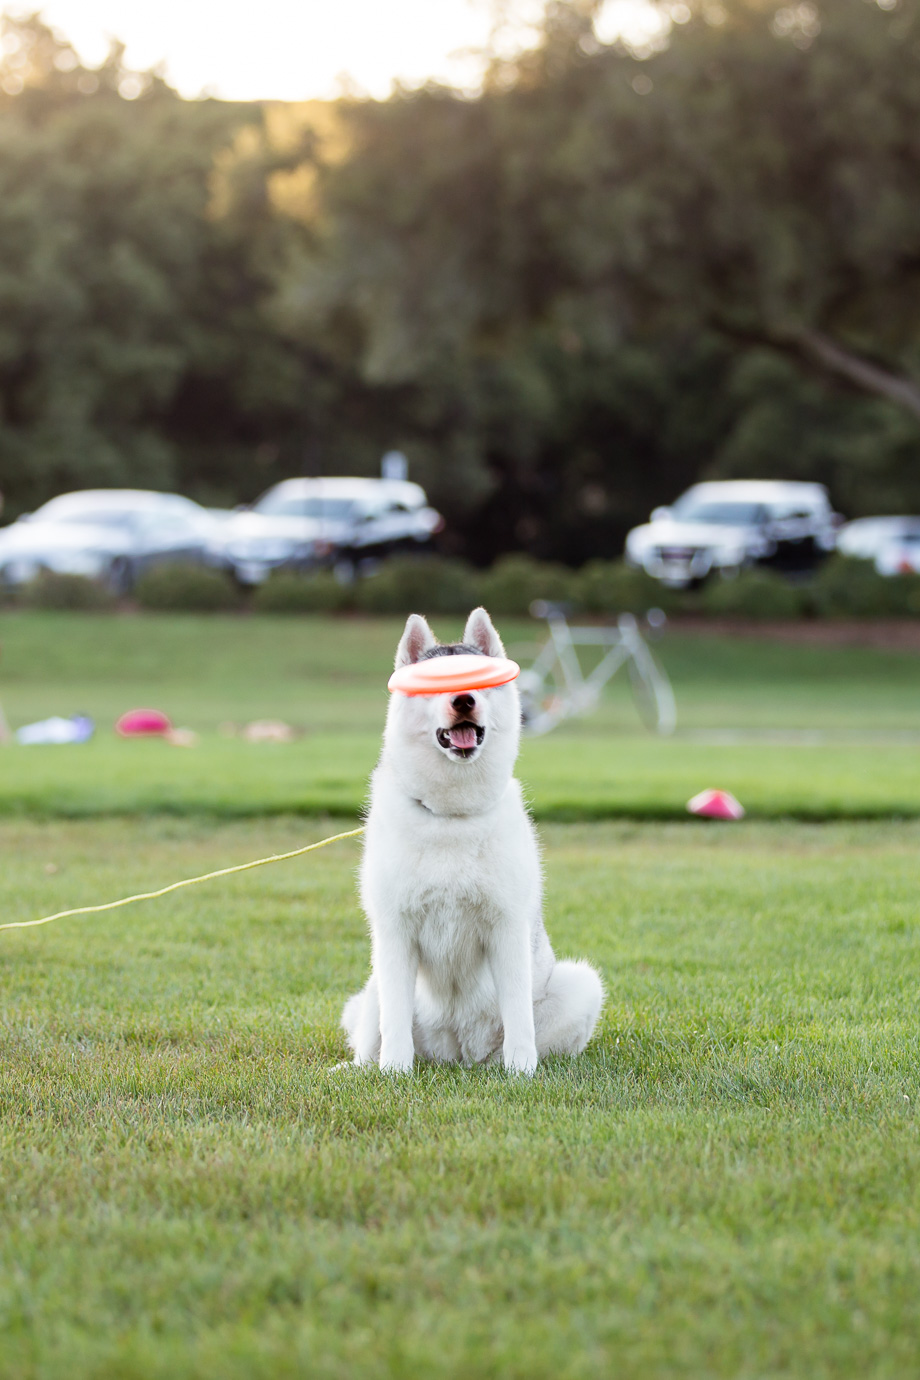 Hilarious moment - husky missed the frisbee!